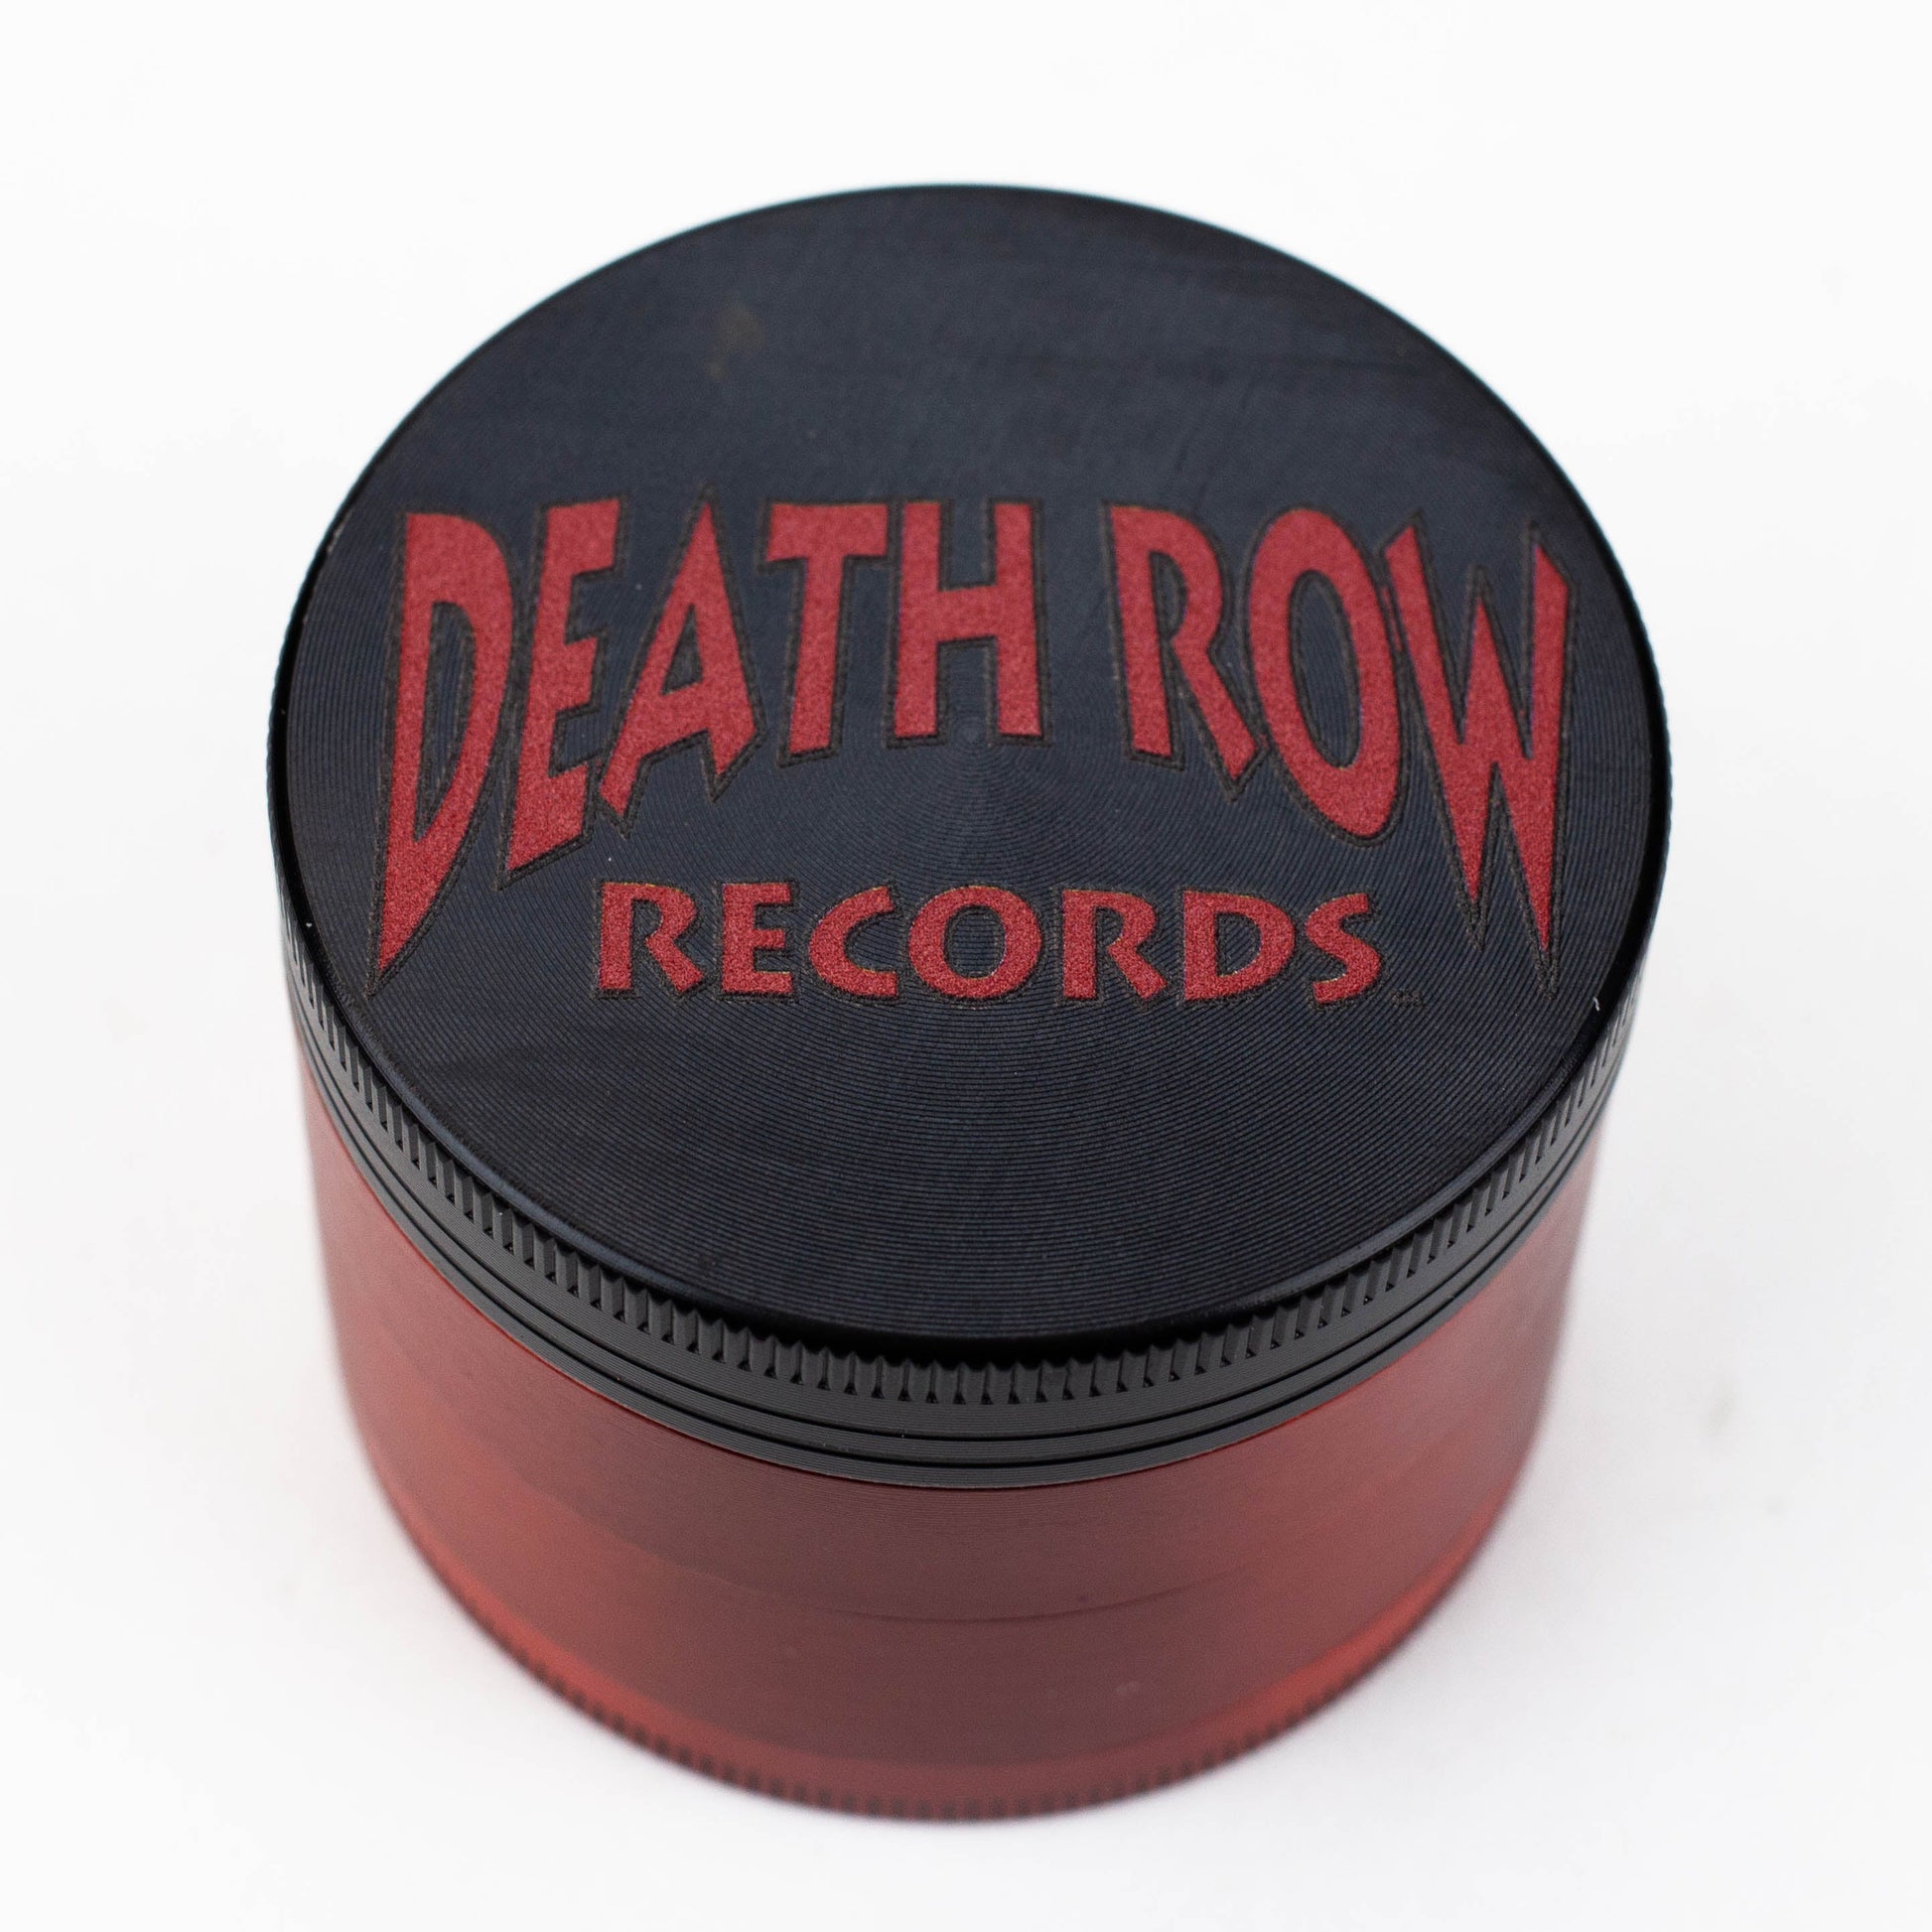 DEATH ROW - 4 parts metal red grinder by Infyniti_2